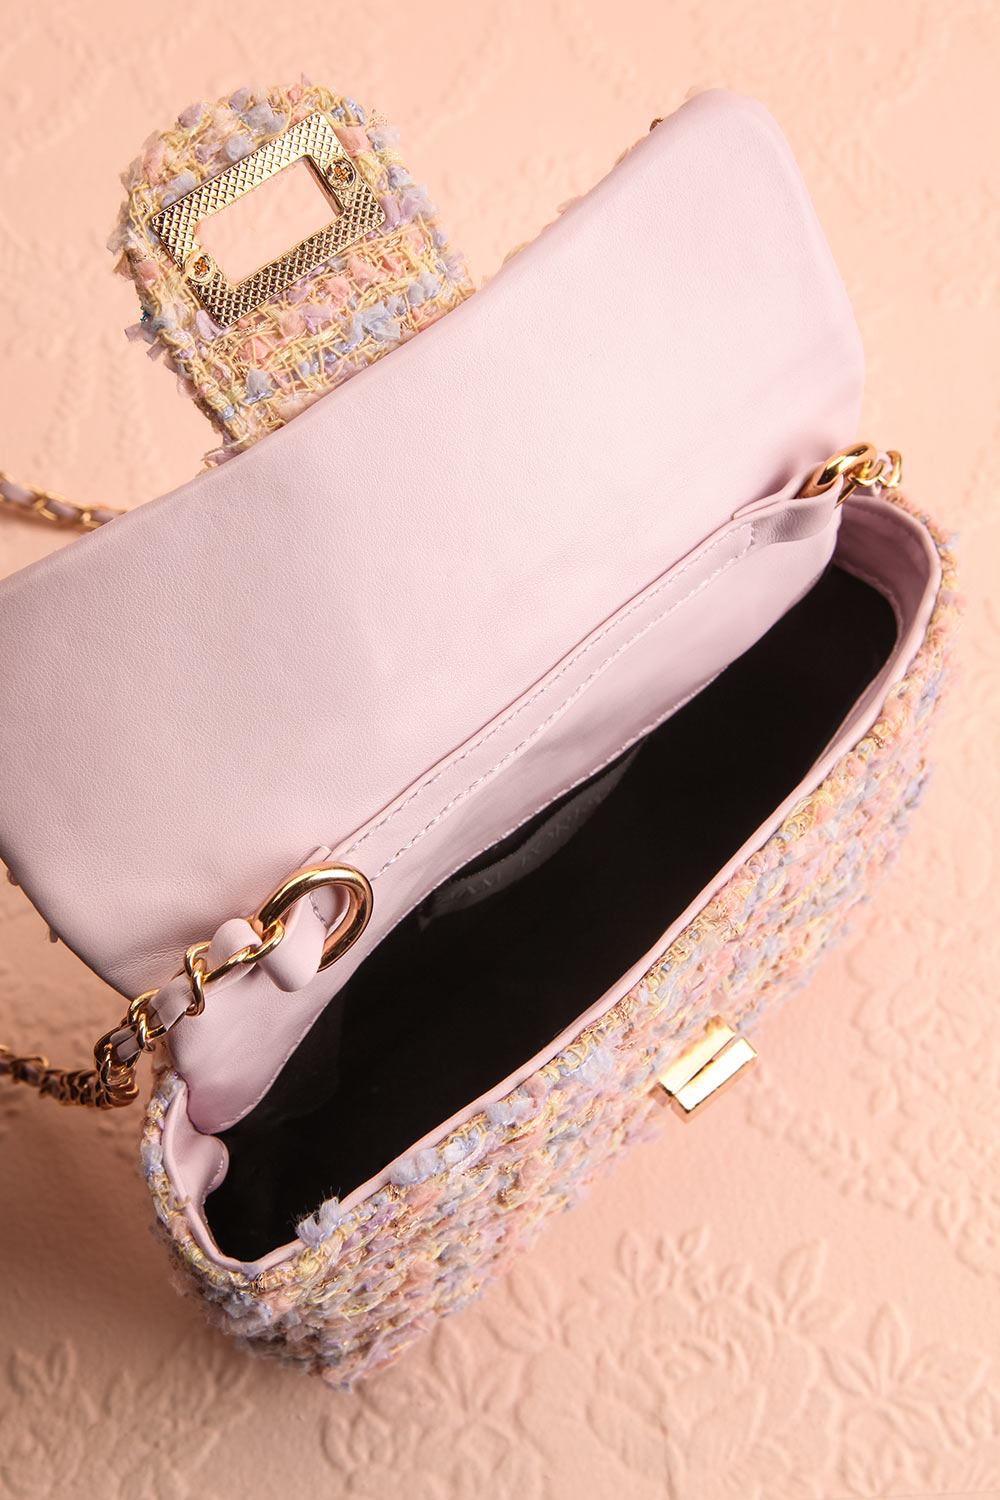 Harmonia Pink Small Clutch Bag w/ Chain Strap | Boutique 1861 inside view